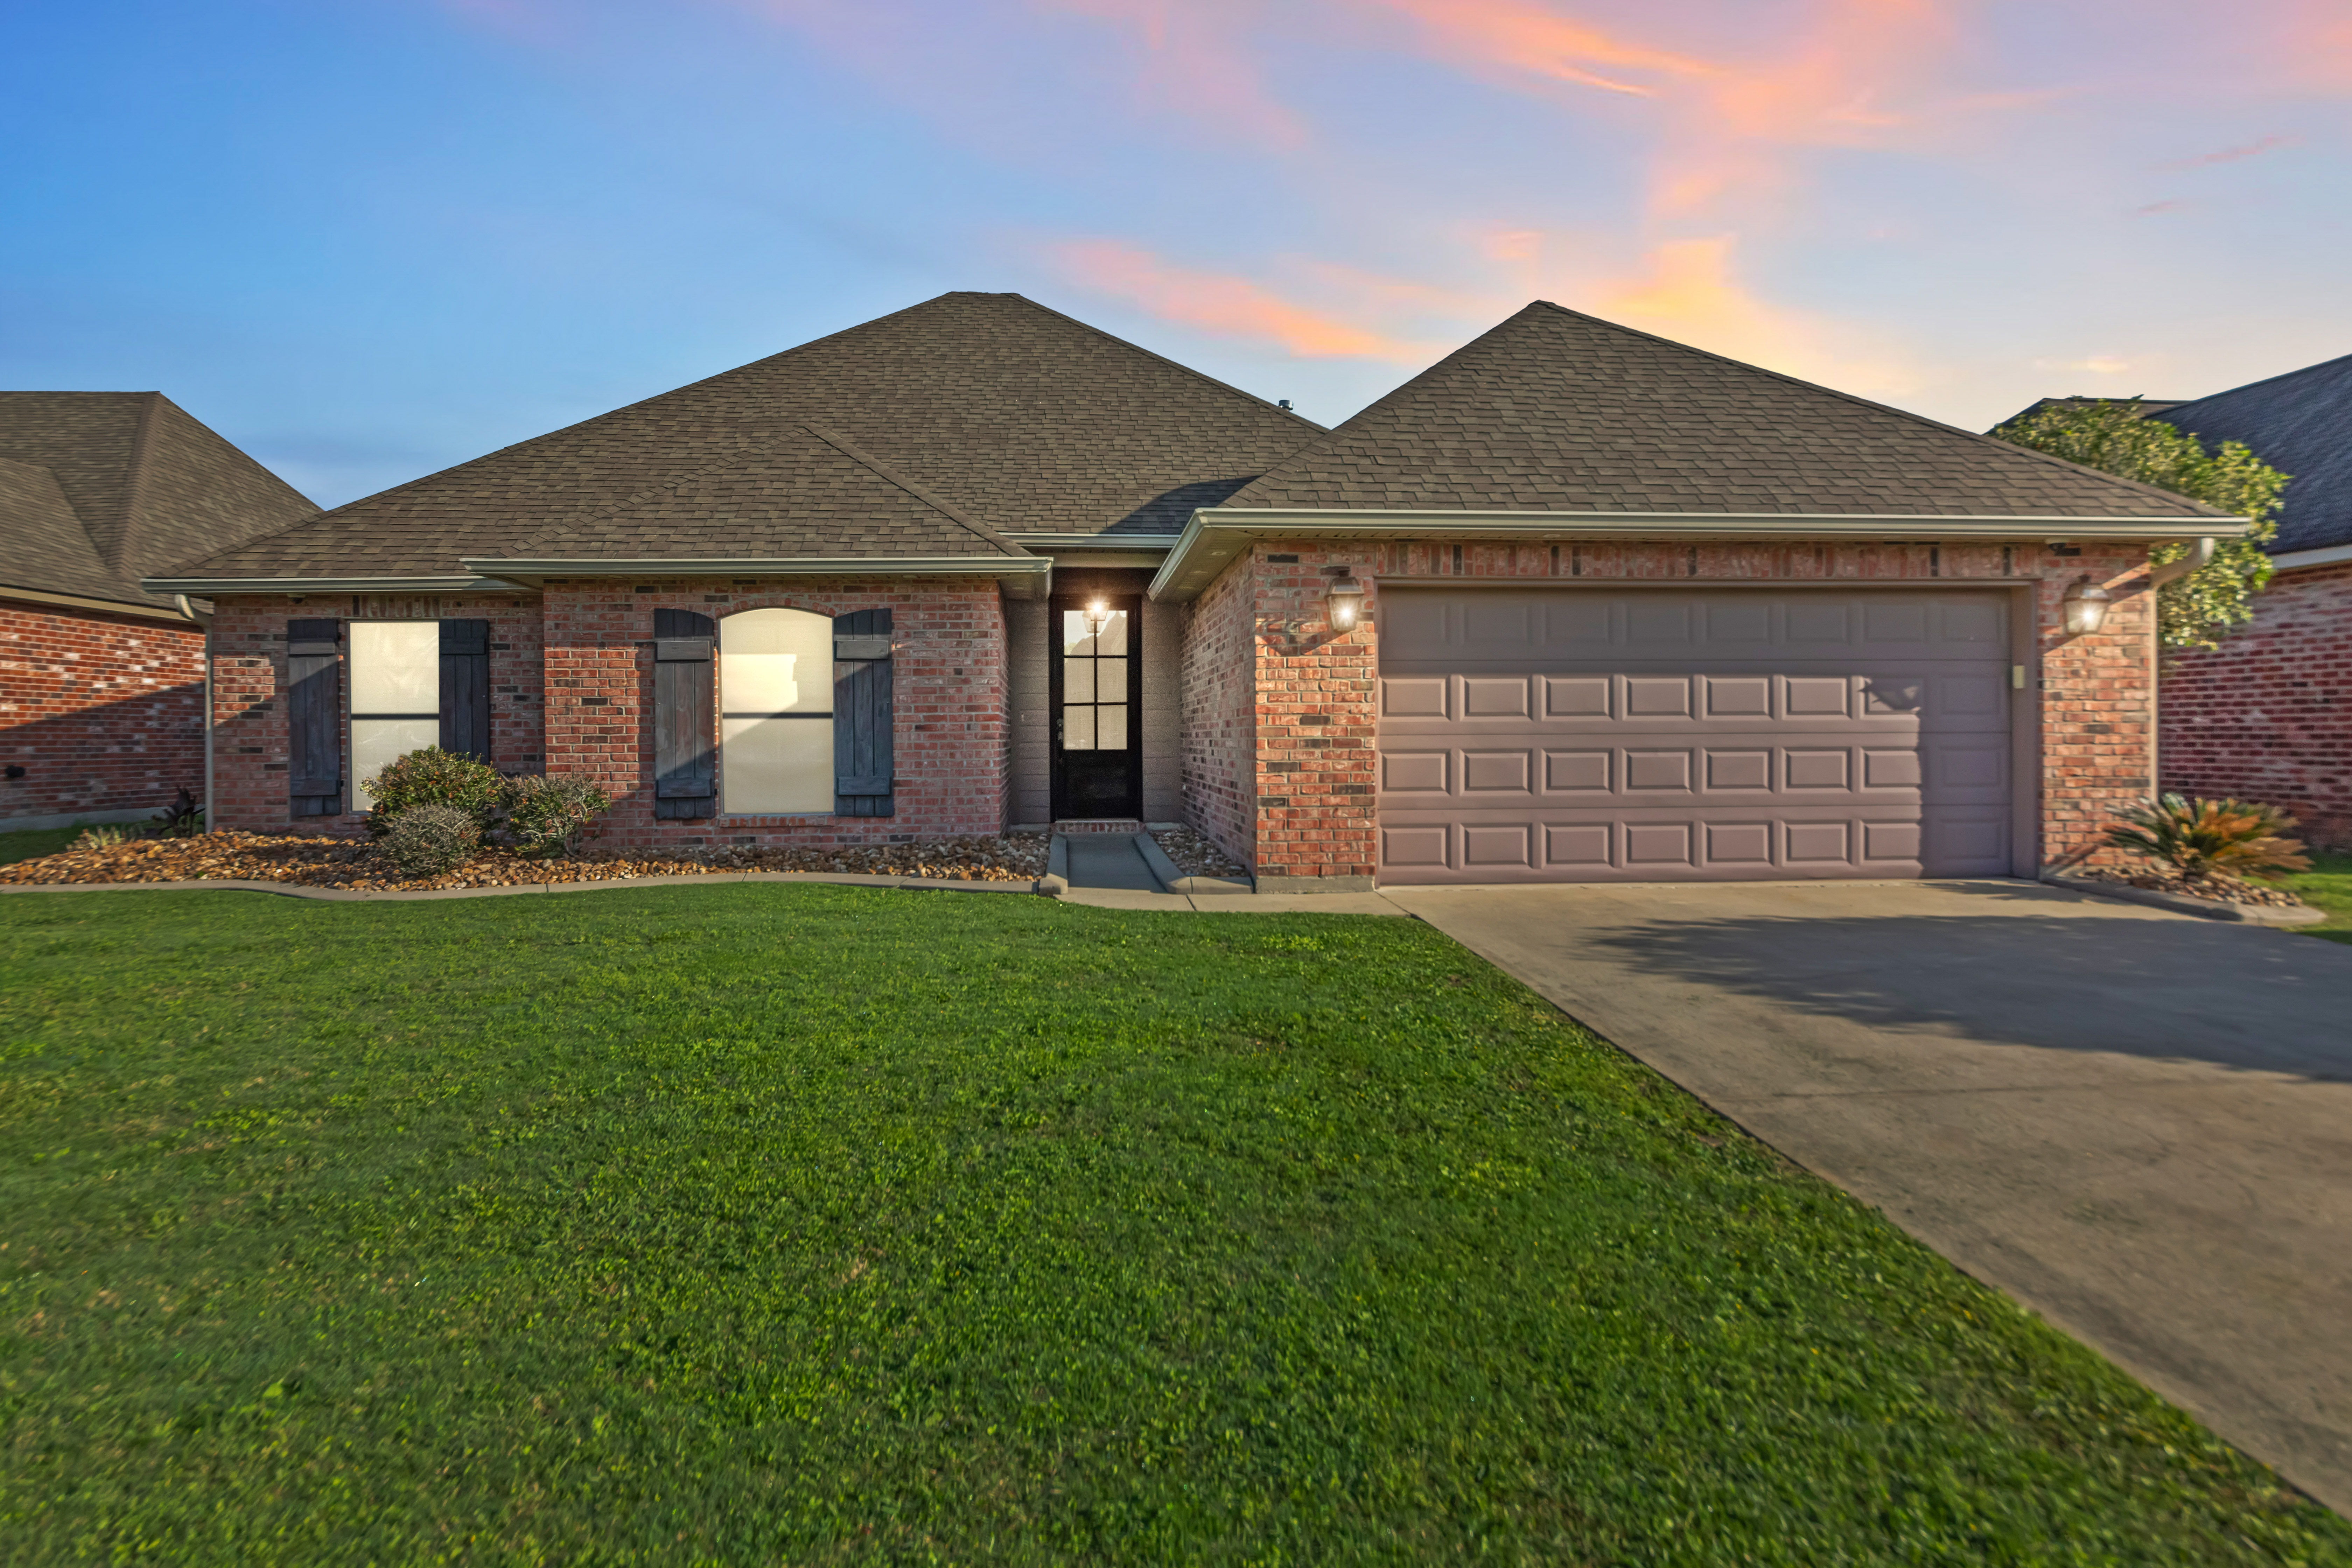 406 Beacon Dr., Youngsville